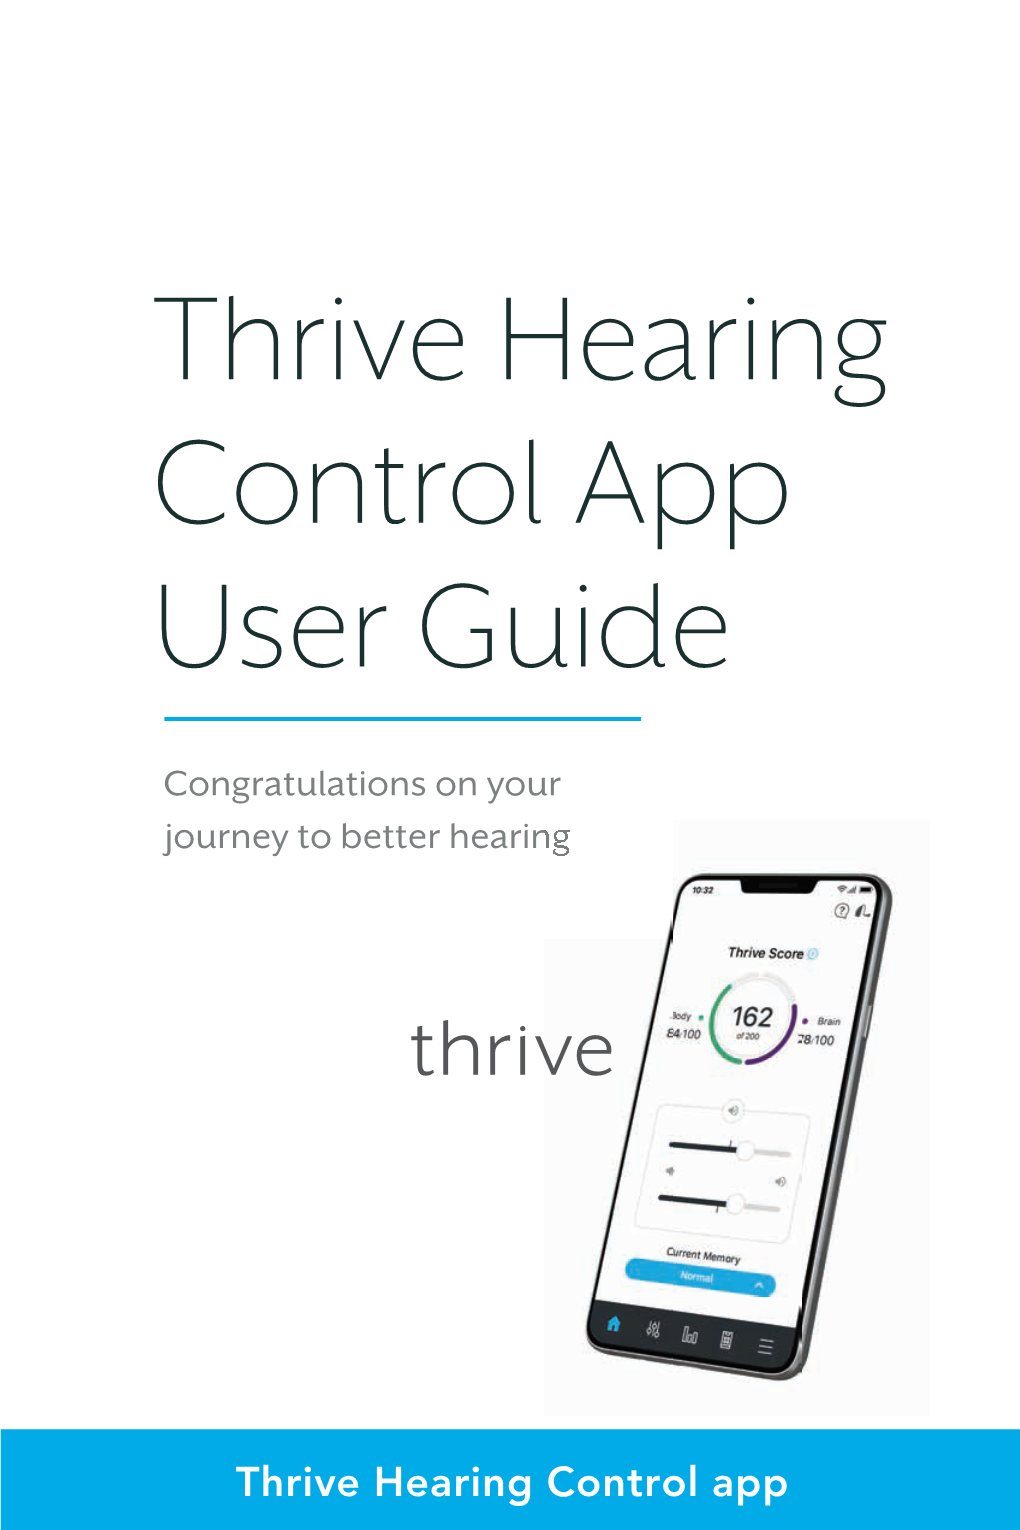 Thrive Hearing Control App User Guide